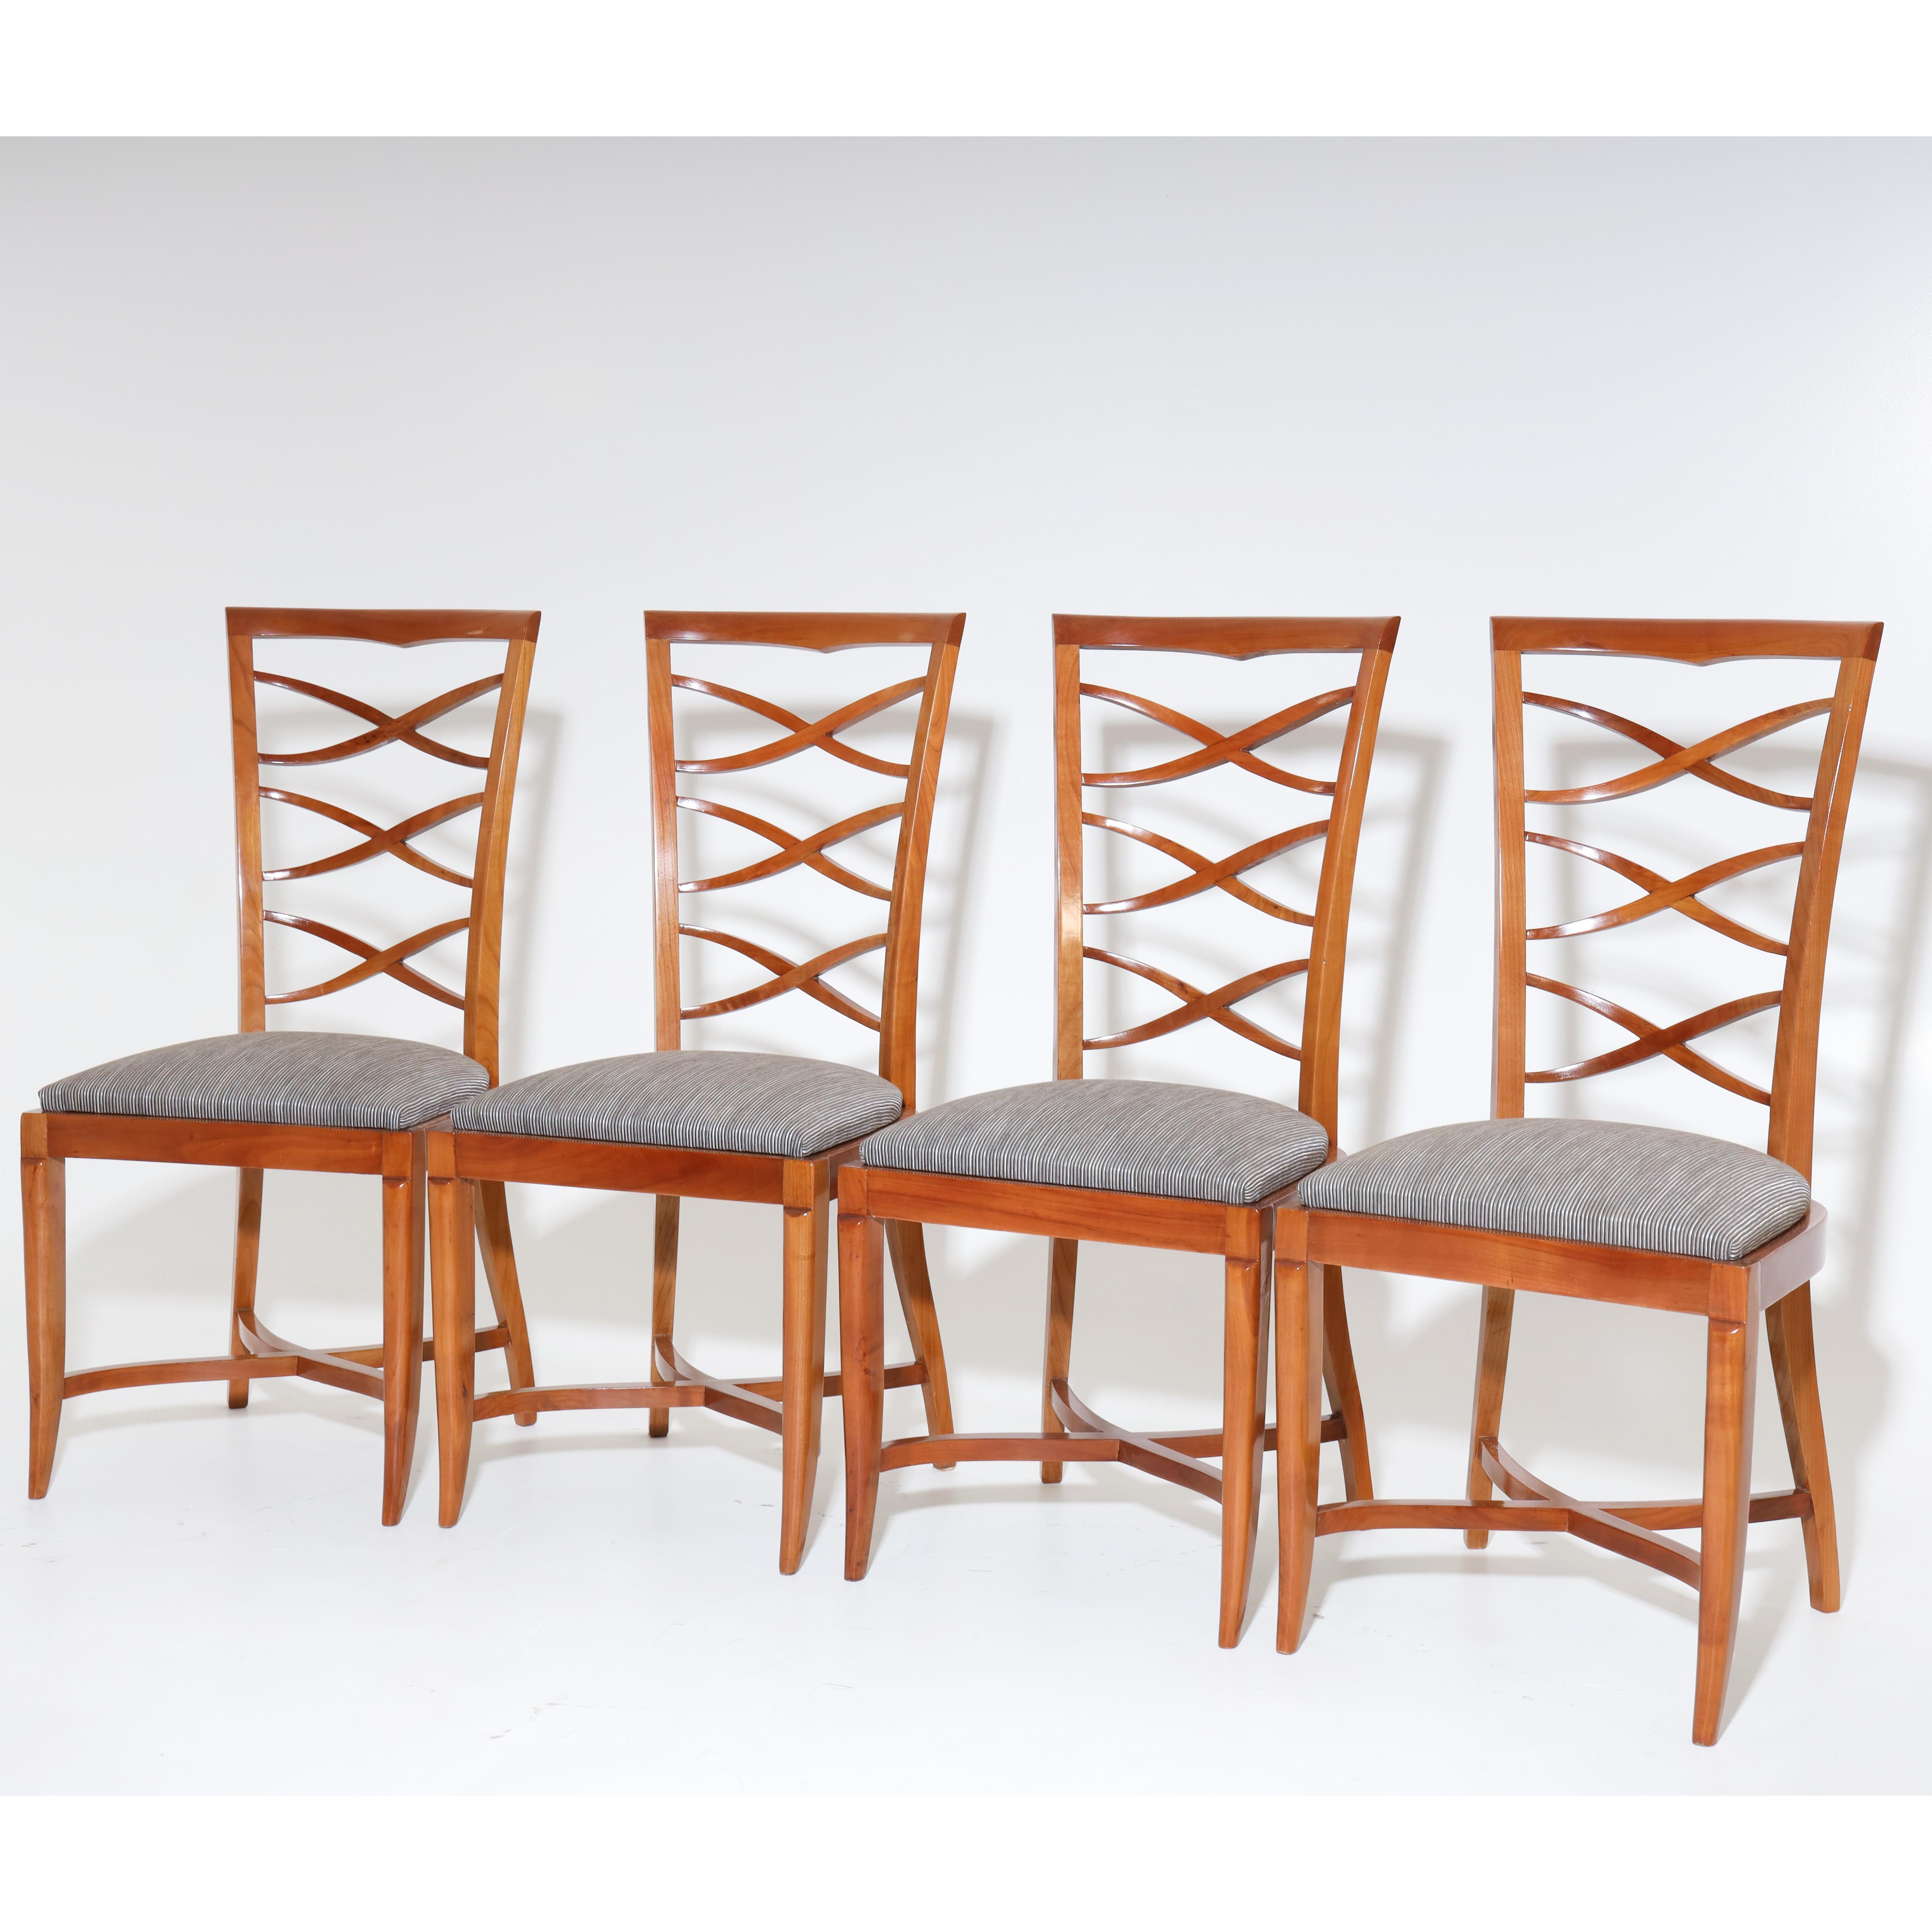 French Art Deco Chairs, Cherry, France, 1940s For Sale